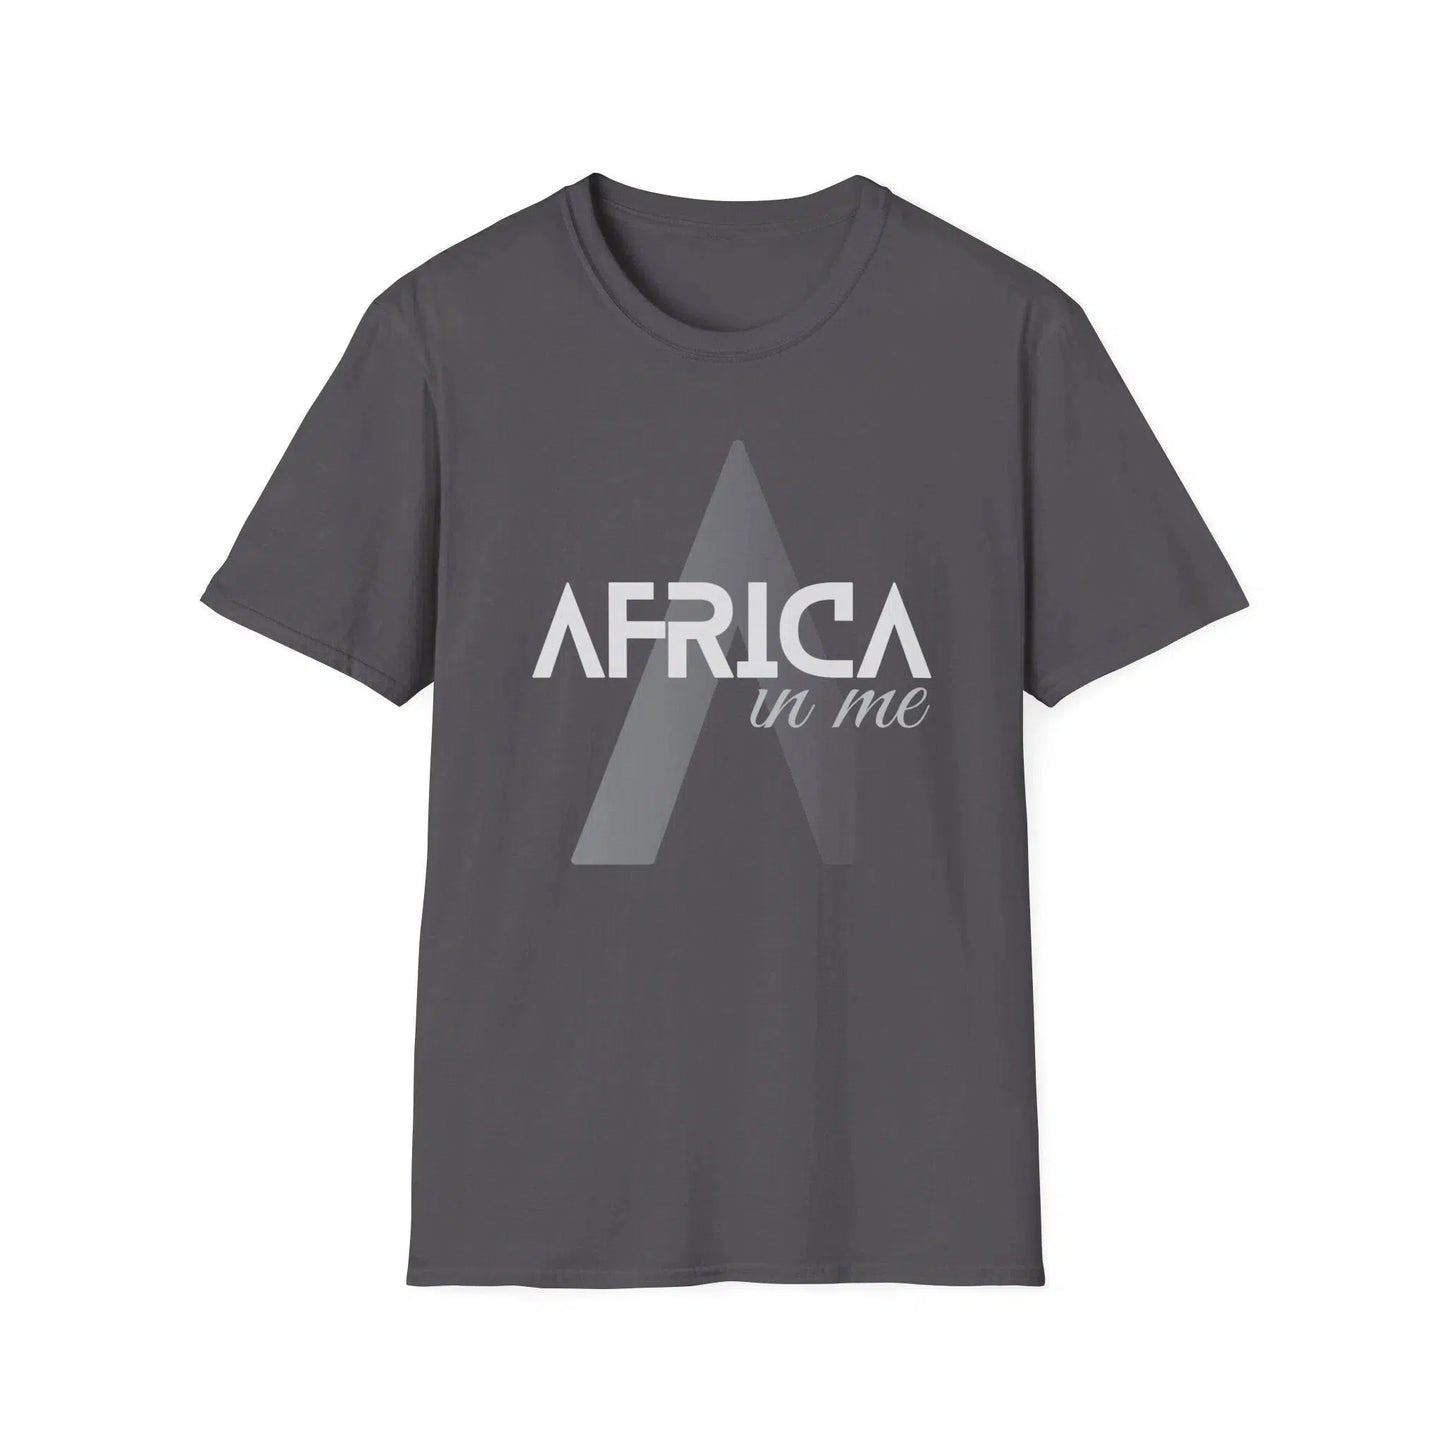 African American T shirts Black Power history